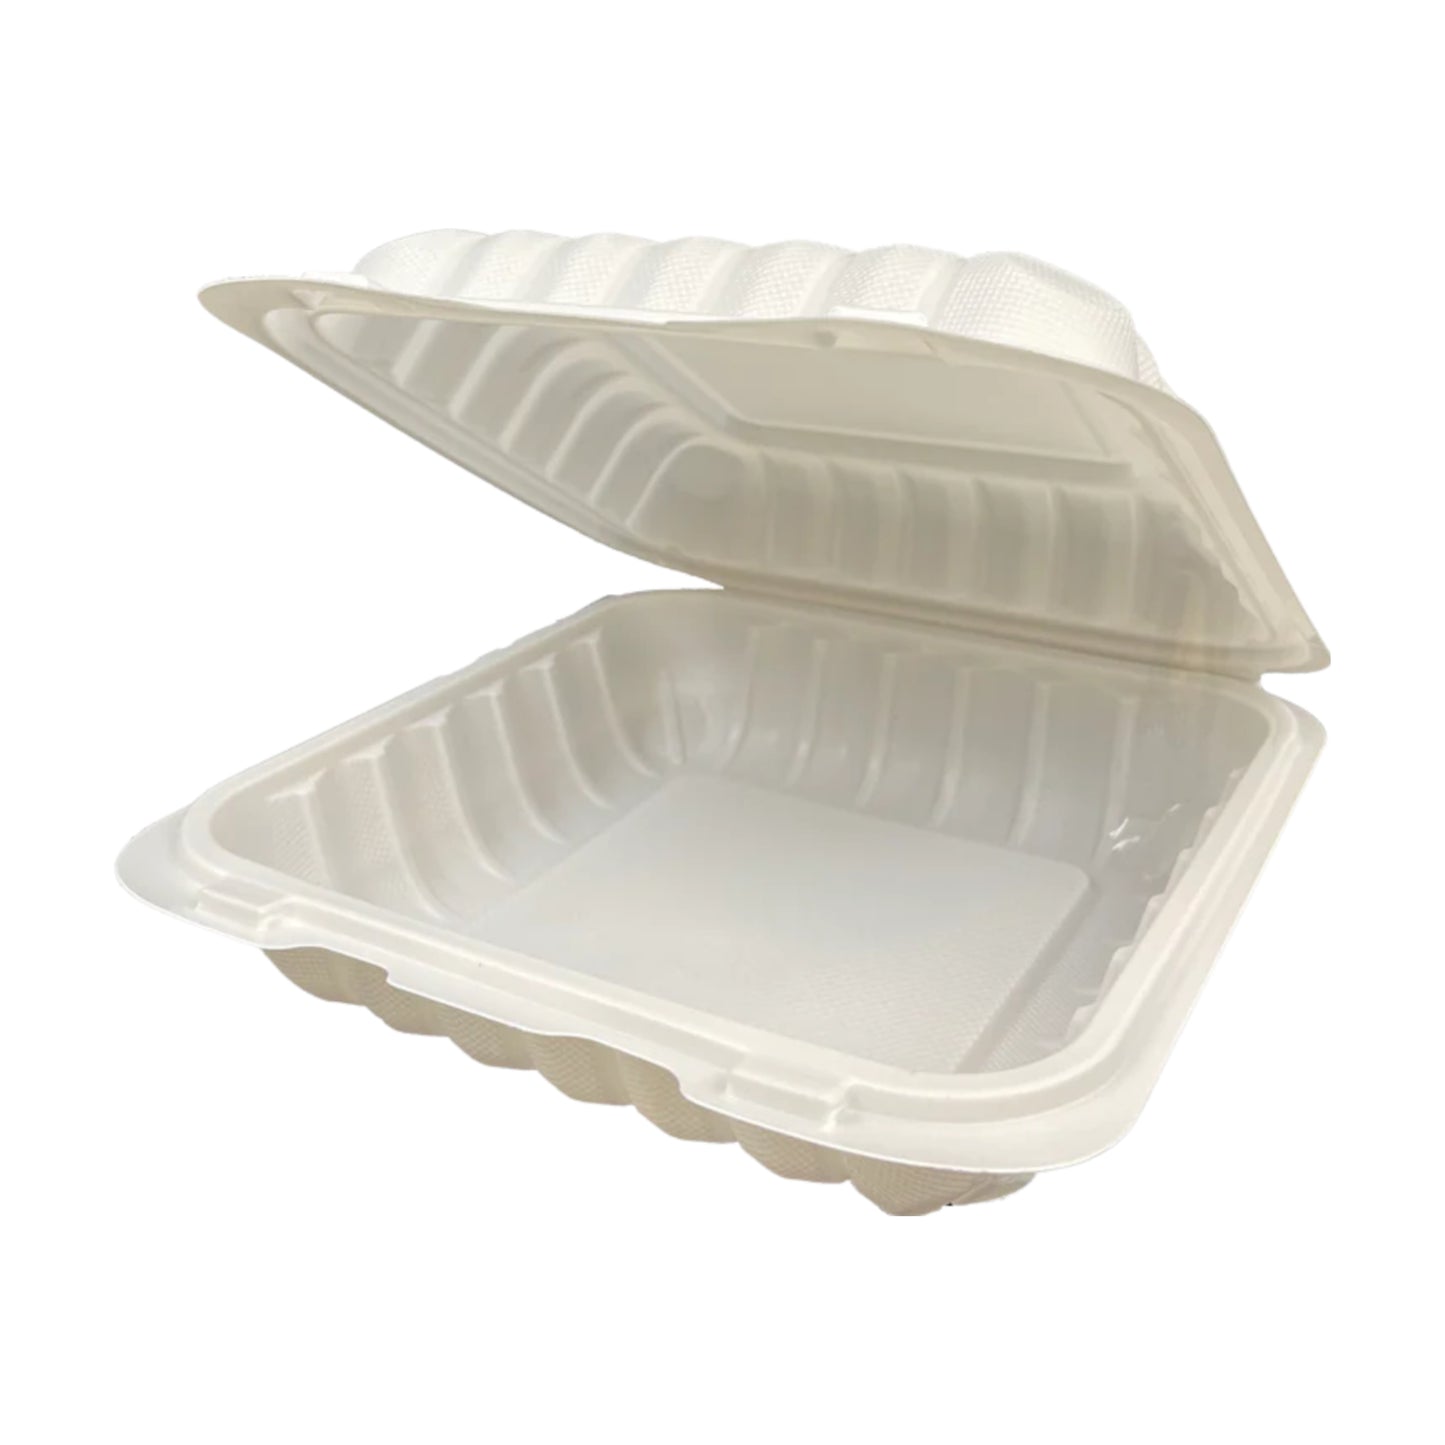 KIS-PP801G | 8x8x3 inches, 1-Compartment, PP Clamshell Food Container; $0.229/pc